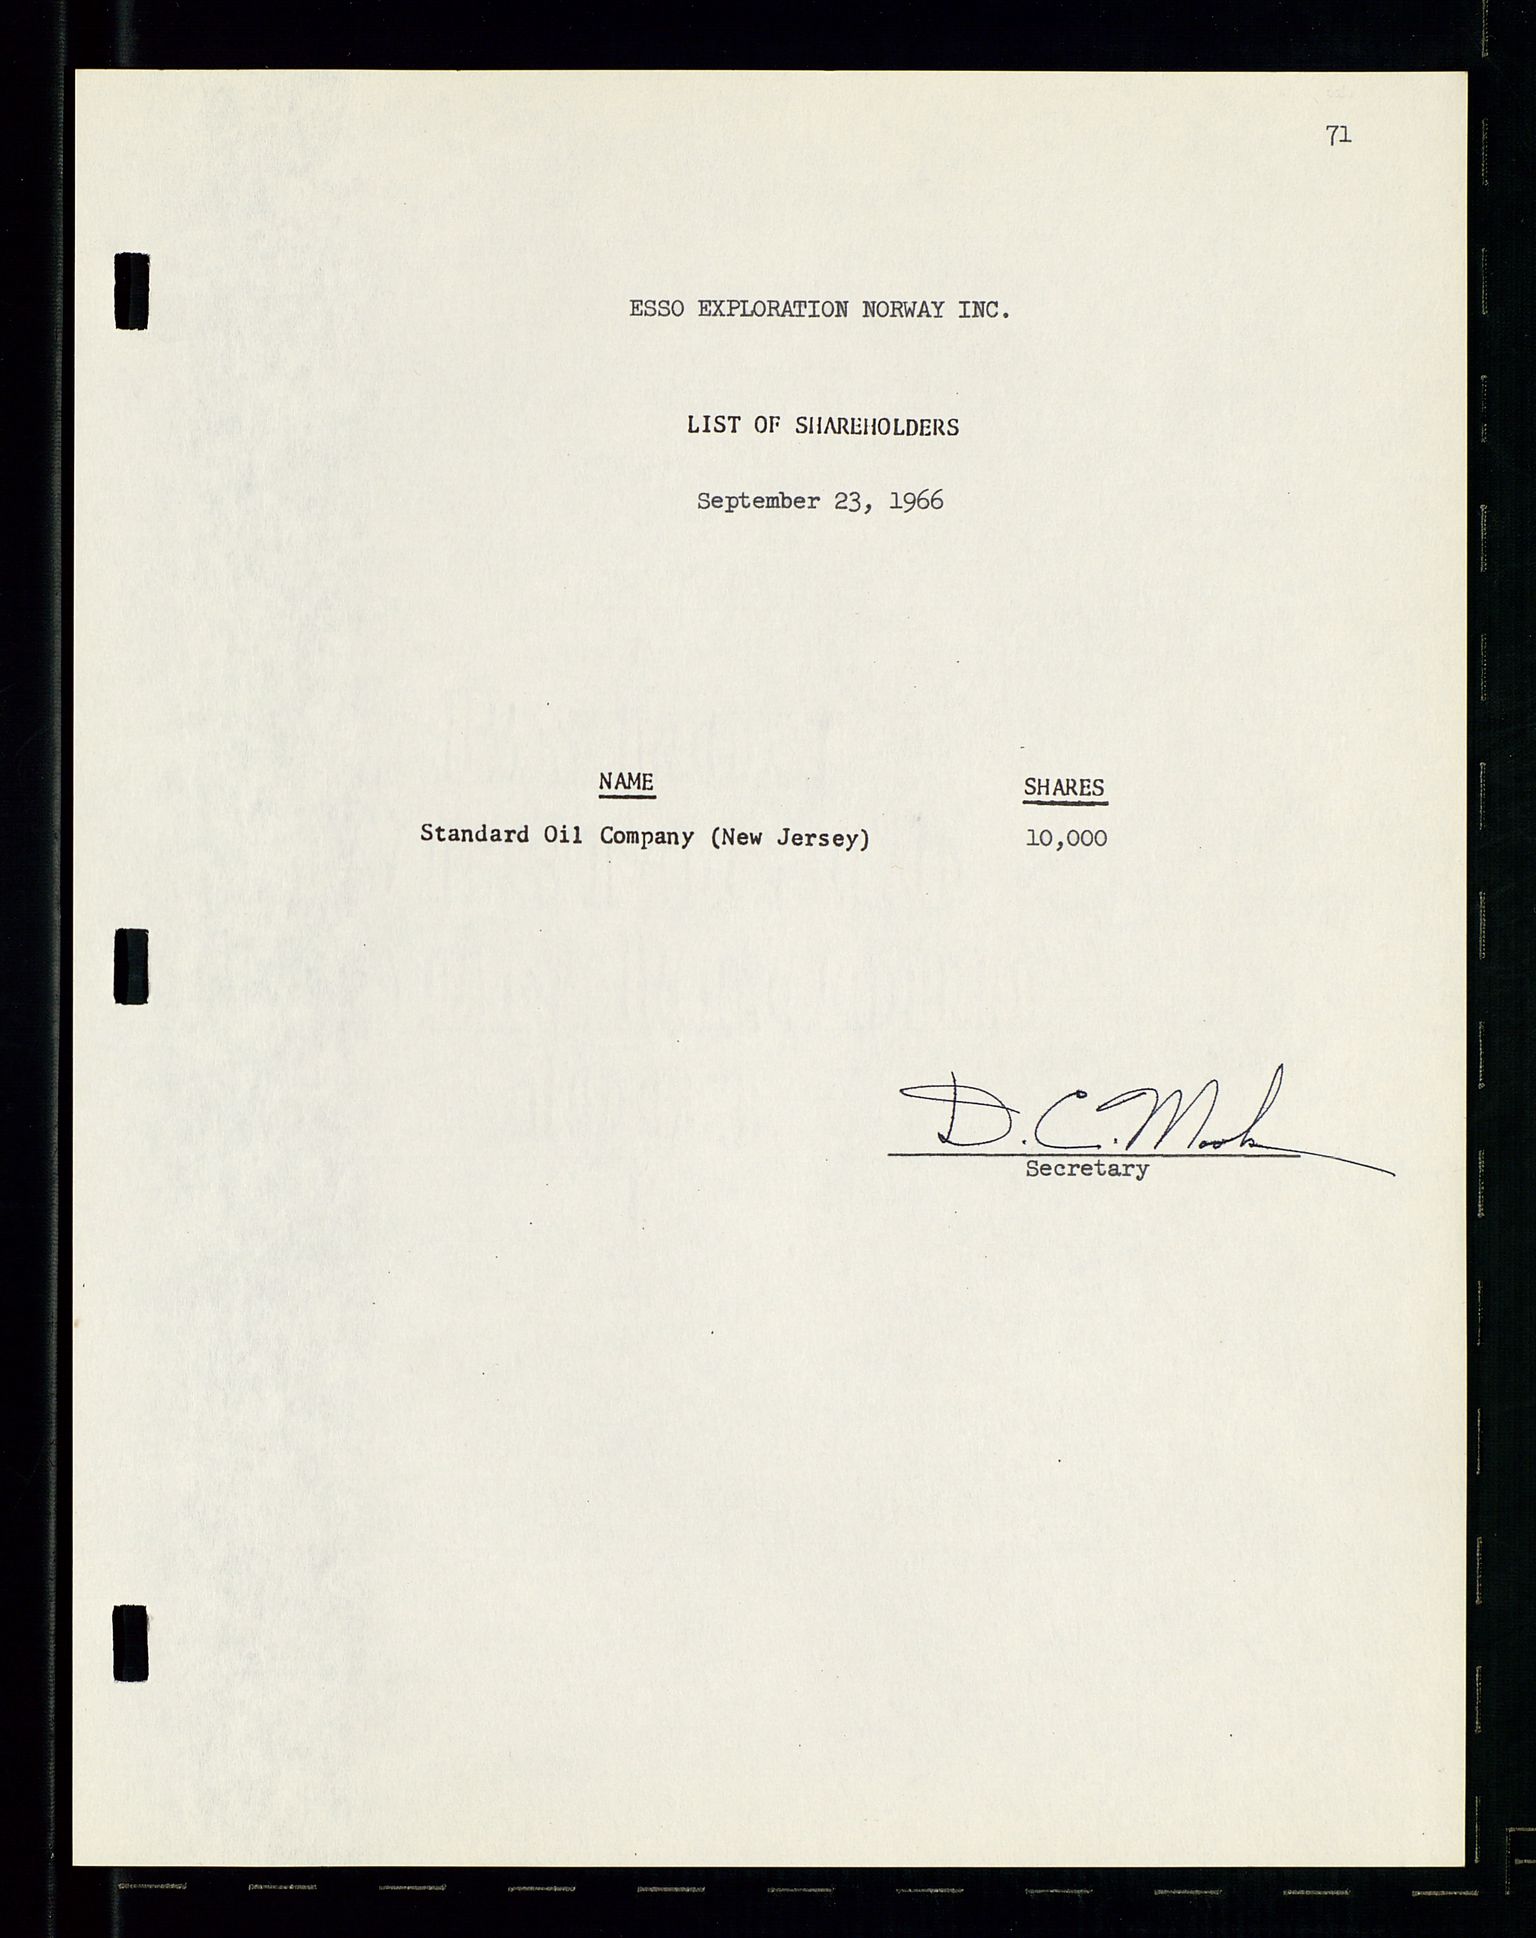 Pa 1512 - Esso Exploration and Production Norway Inc., SAST/A-101917/A/Aa/L0001/0001: Styredokumenter / Corporate records, By-Laws, Board meeting minutes, Incorporations, 1965-1975, s. 71